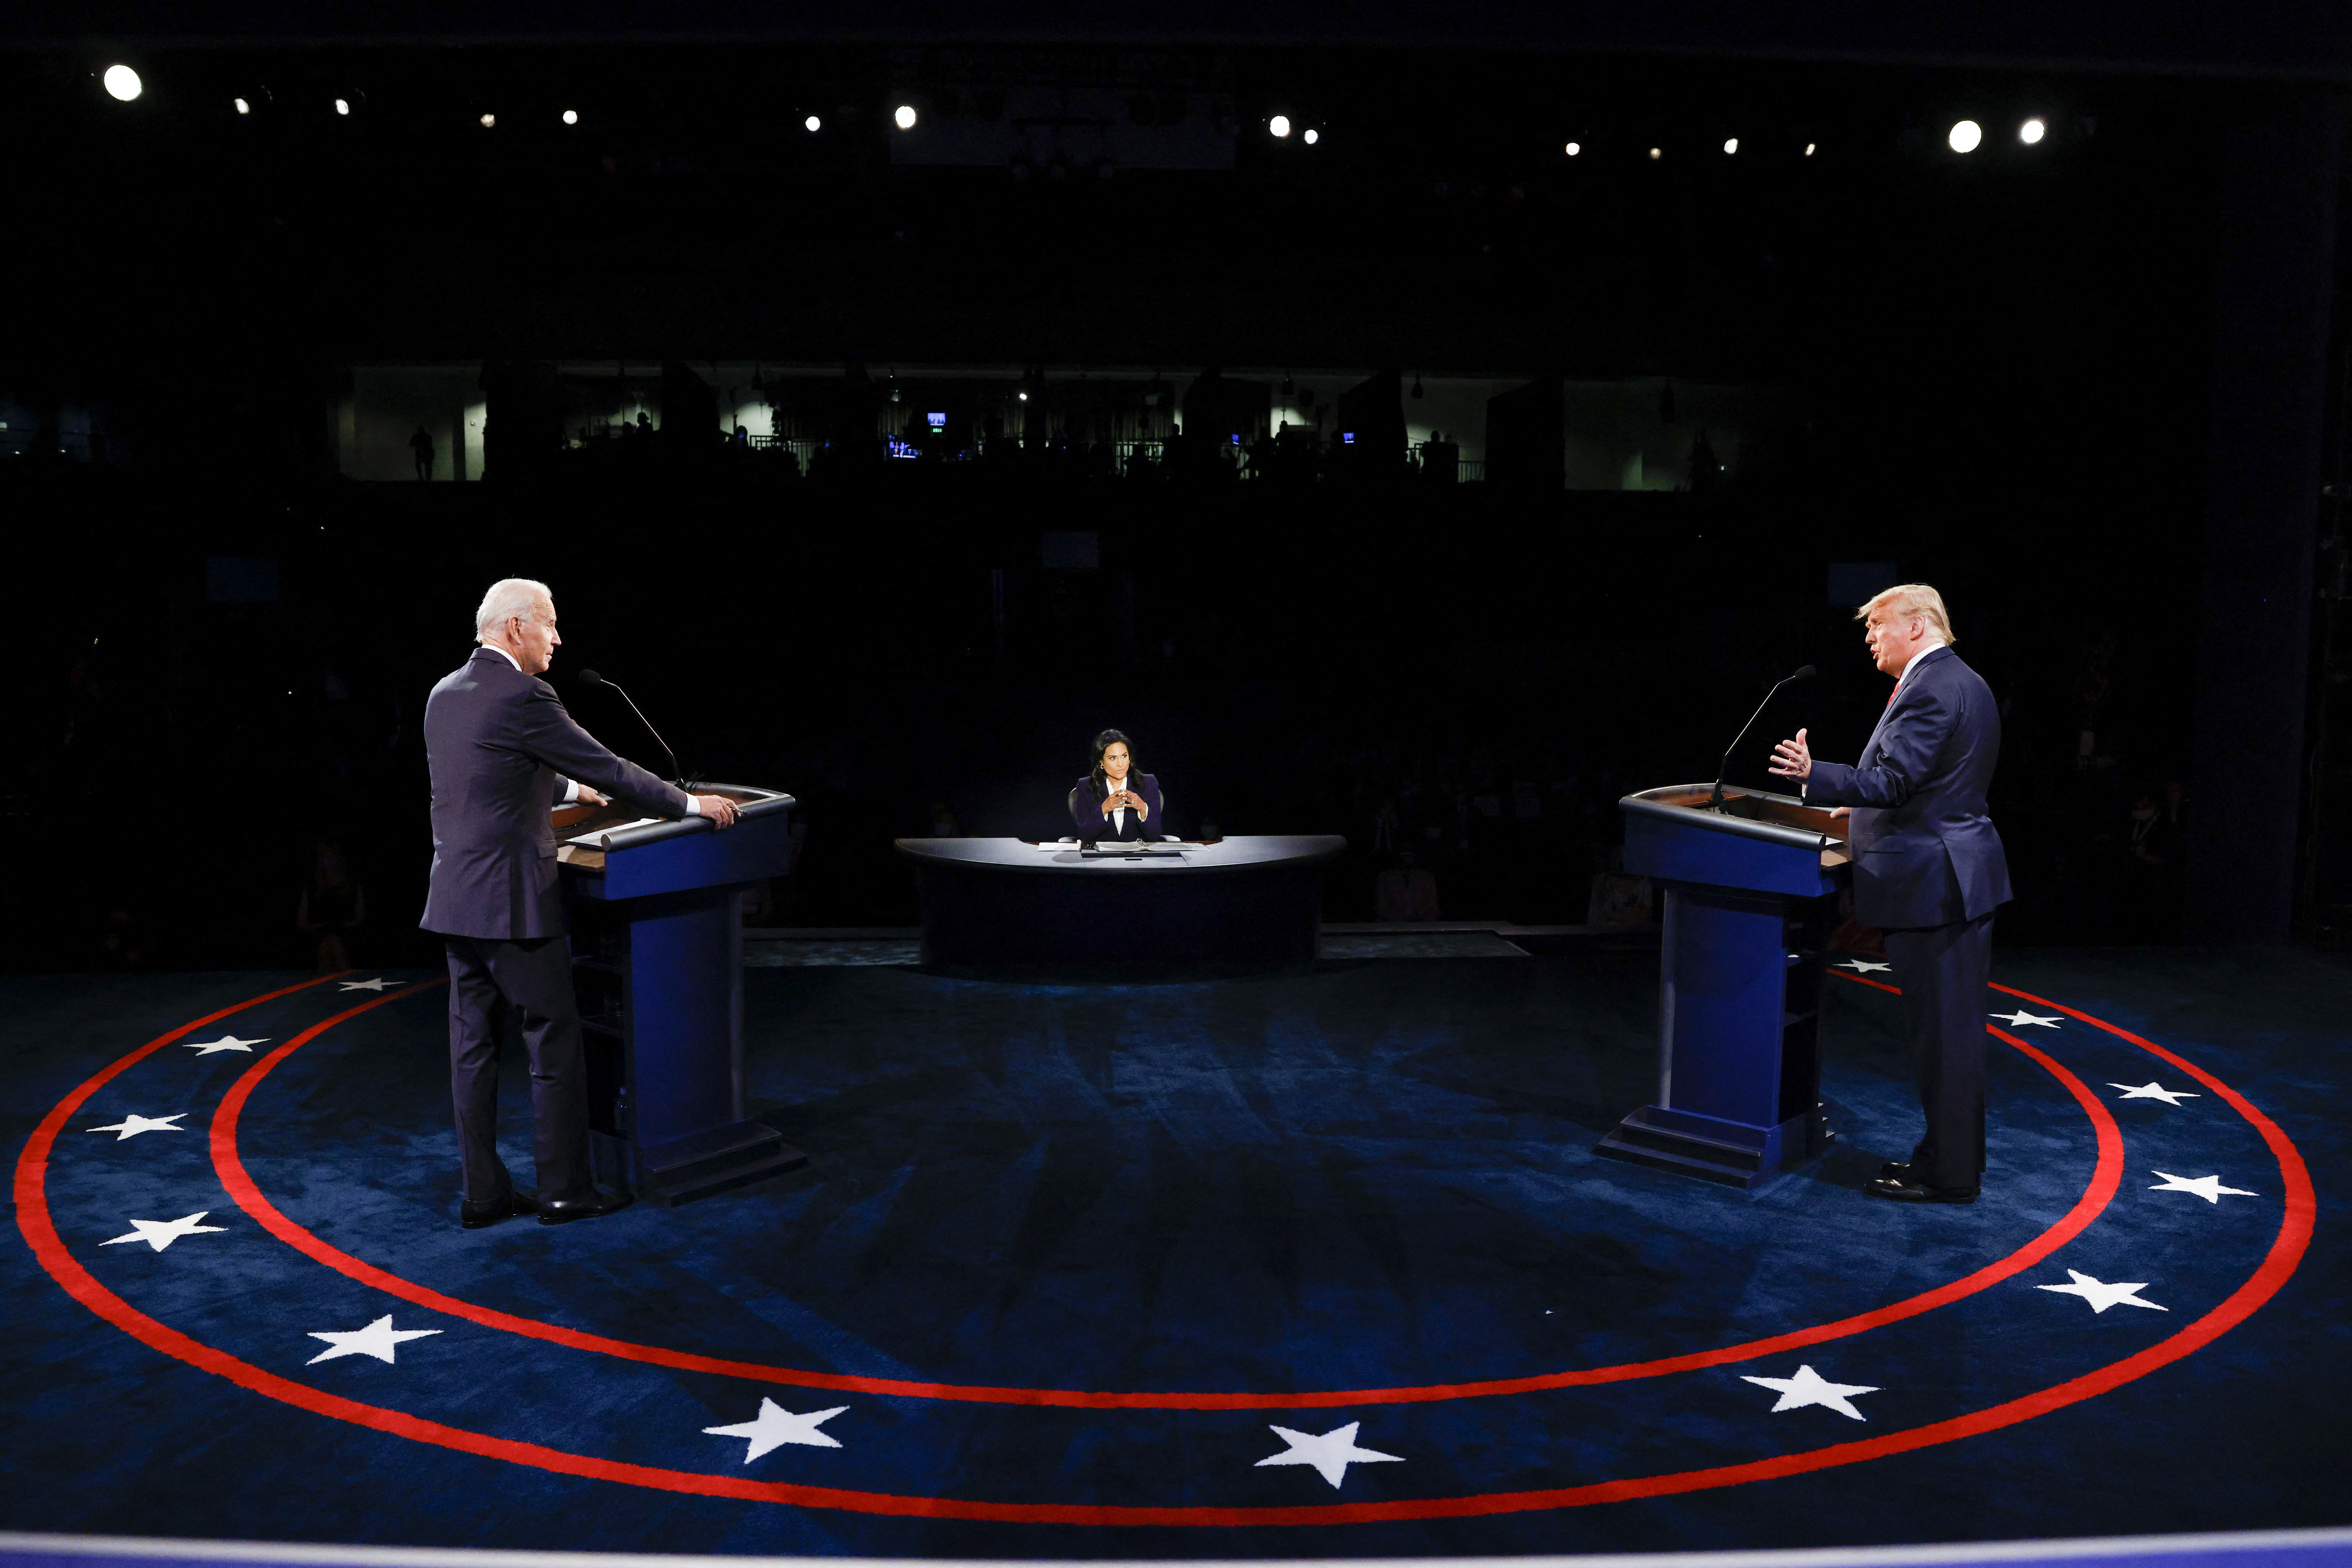 US President Donald Trump (R) Democratic Presidential candidate, former US Vice President Joe Biden and moderator, NBC News anchor, Kristen Welker (C) participate in the final presidential debate at Belmont University in Nashville, Tennessee, on October 22, 2020. (Photo by JIM BOURG / POOL / AFP) (Photo by JIM BOURG/POOL/AFP via Getty Images)